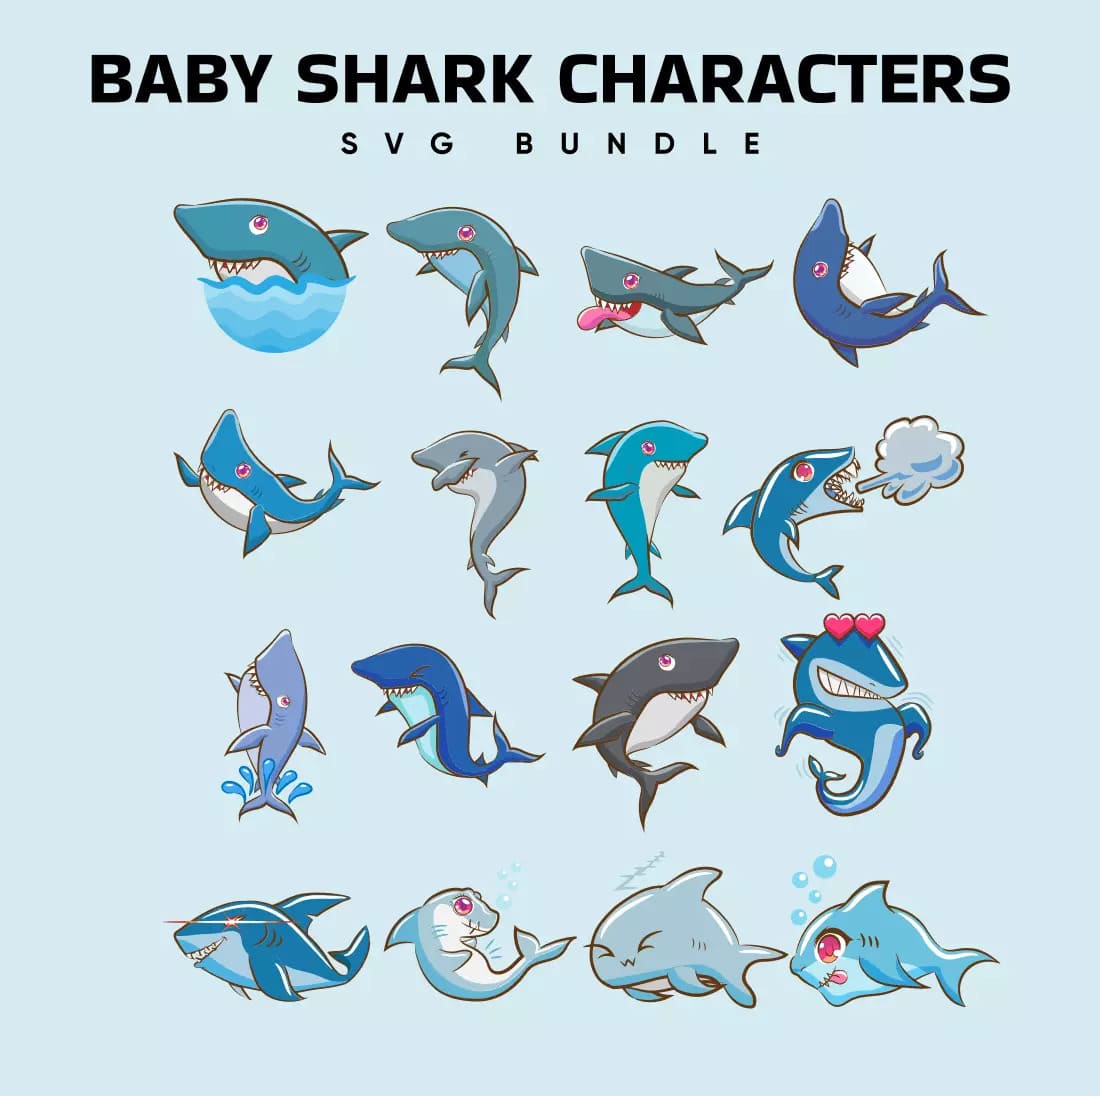 Baby Shark Characters SVG Bundle Preview image.